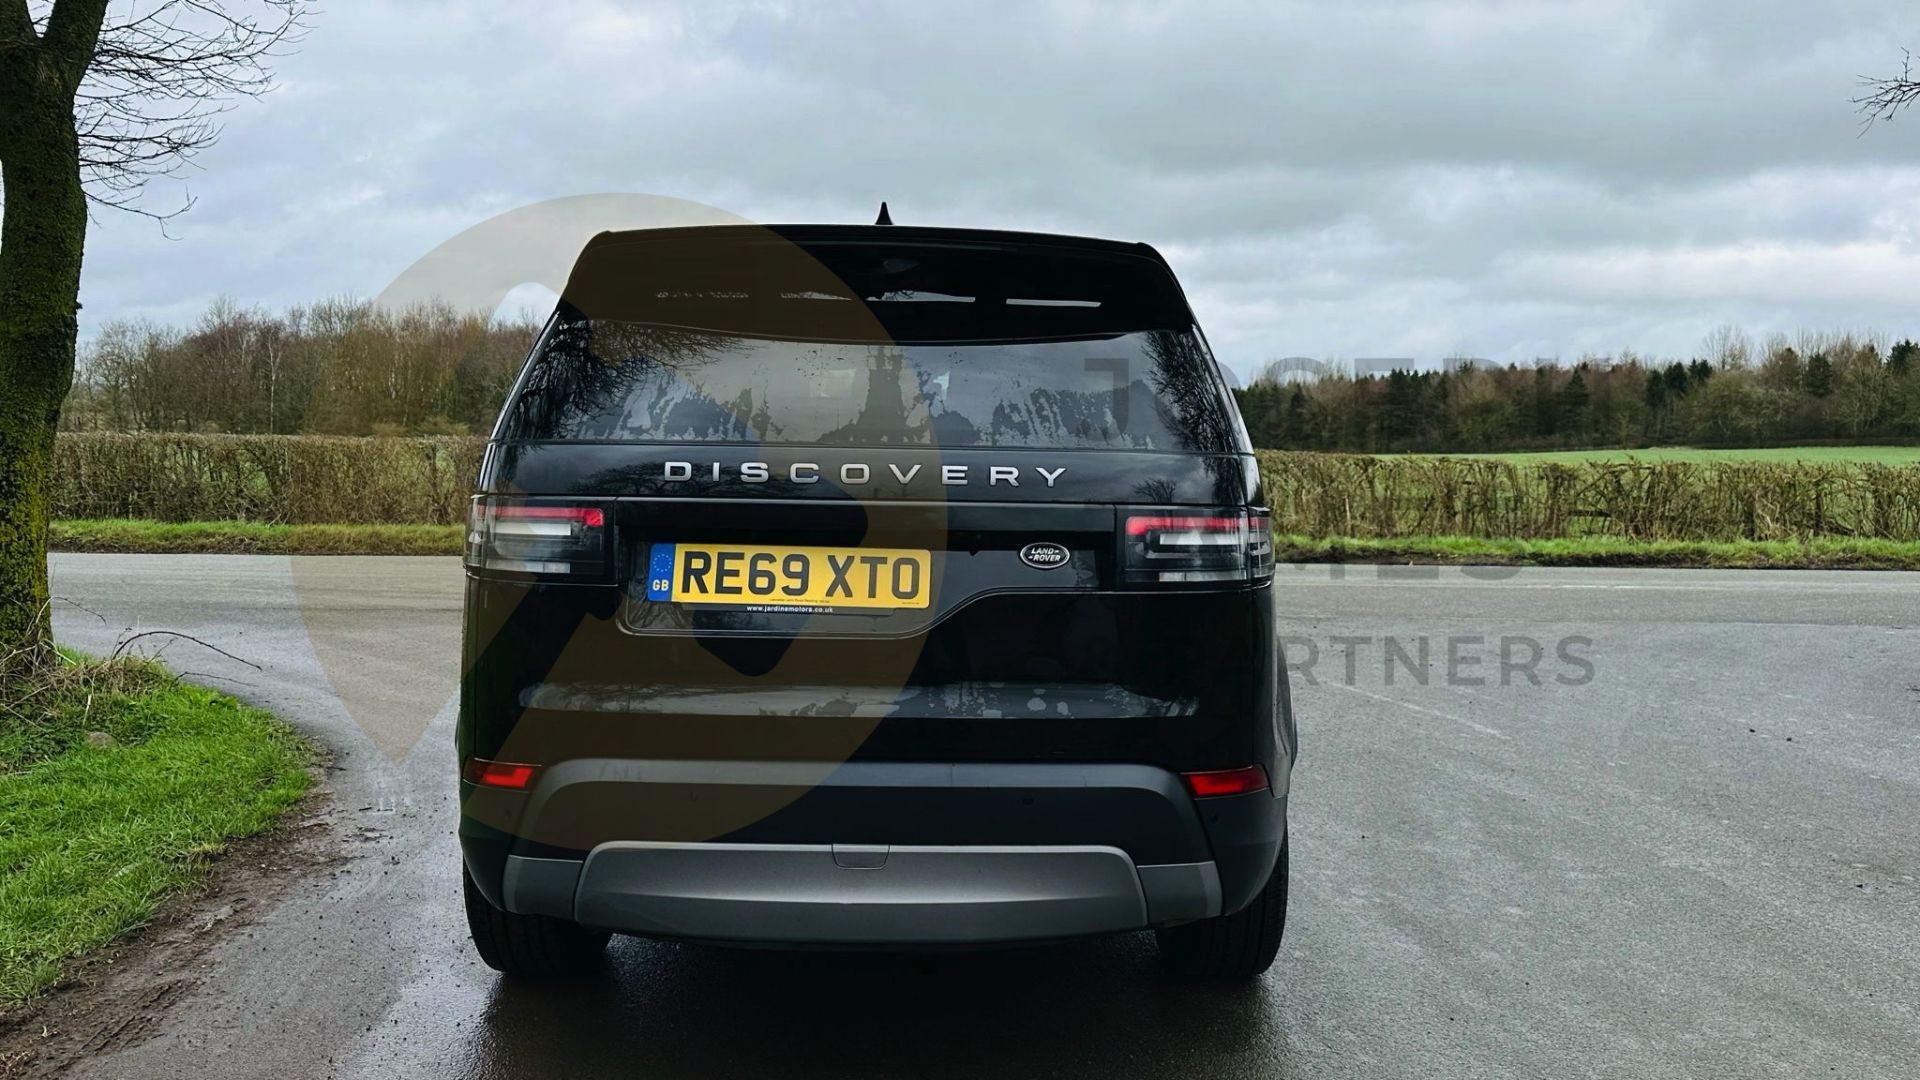 LAND ROVER DISCOVERY 5 *SE EDITION* 7 SEATER SUV (2020 - EURO 6 DIESEL) 8 SPEED AUTO *HUGE SPEC* - Image 13 of 57